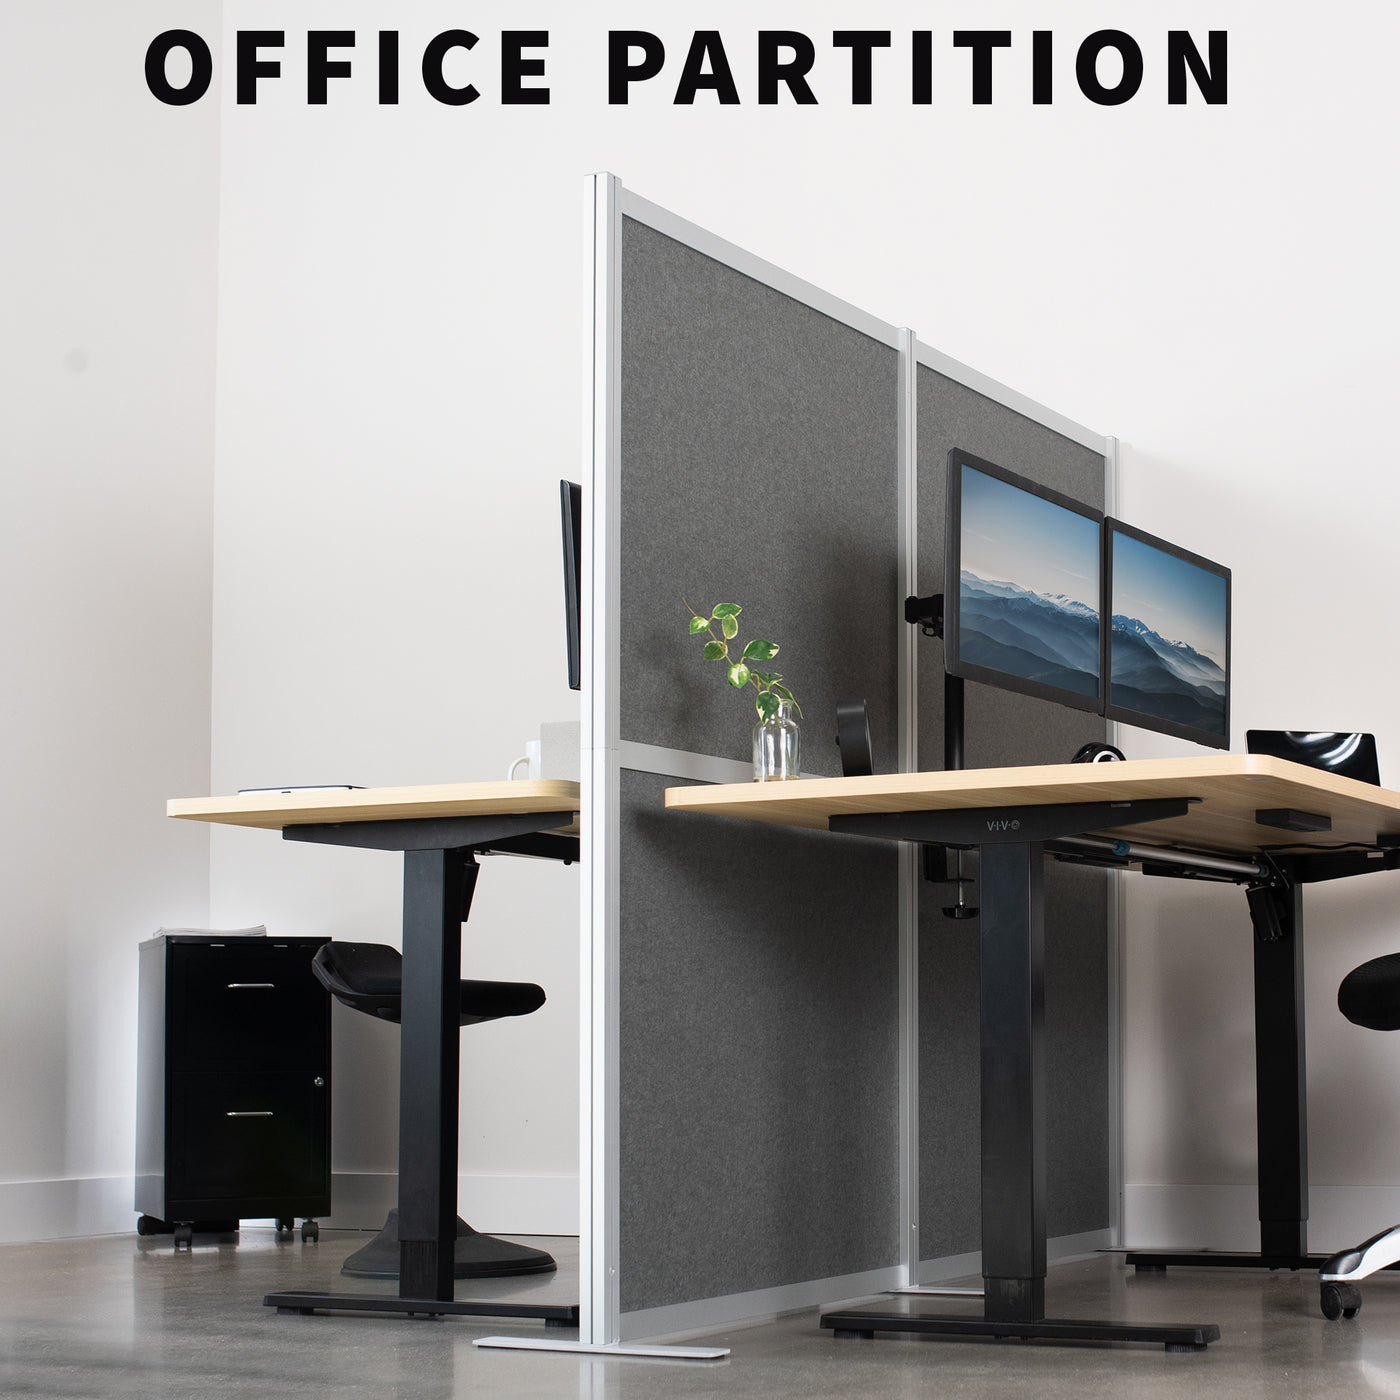 Office partition of two desks made possible with room/ wall divider between the desks.